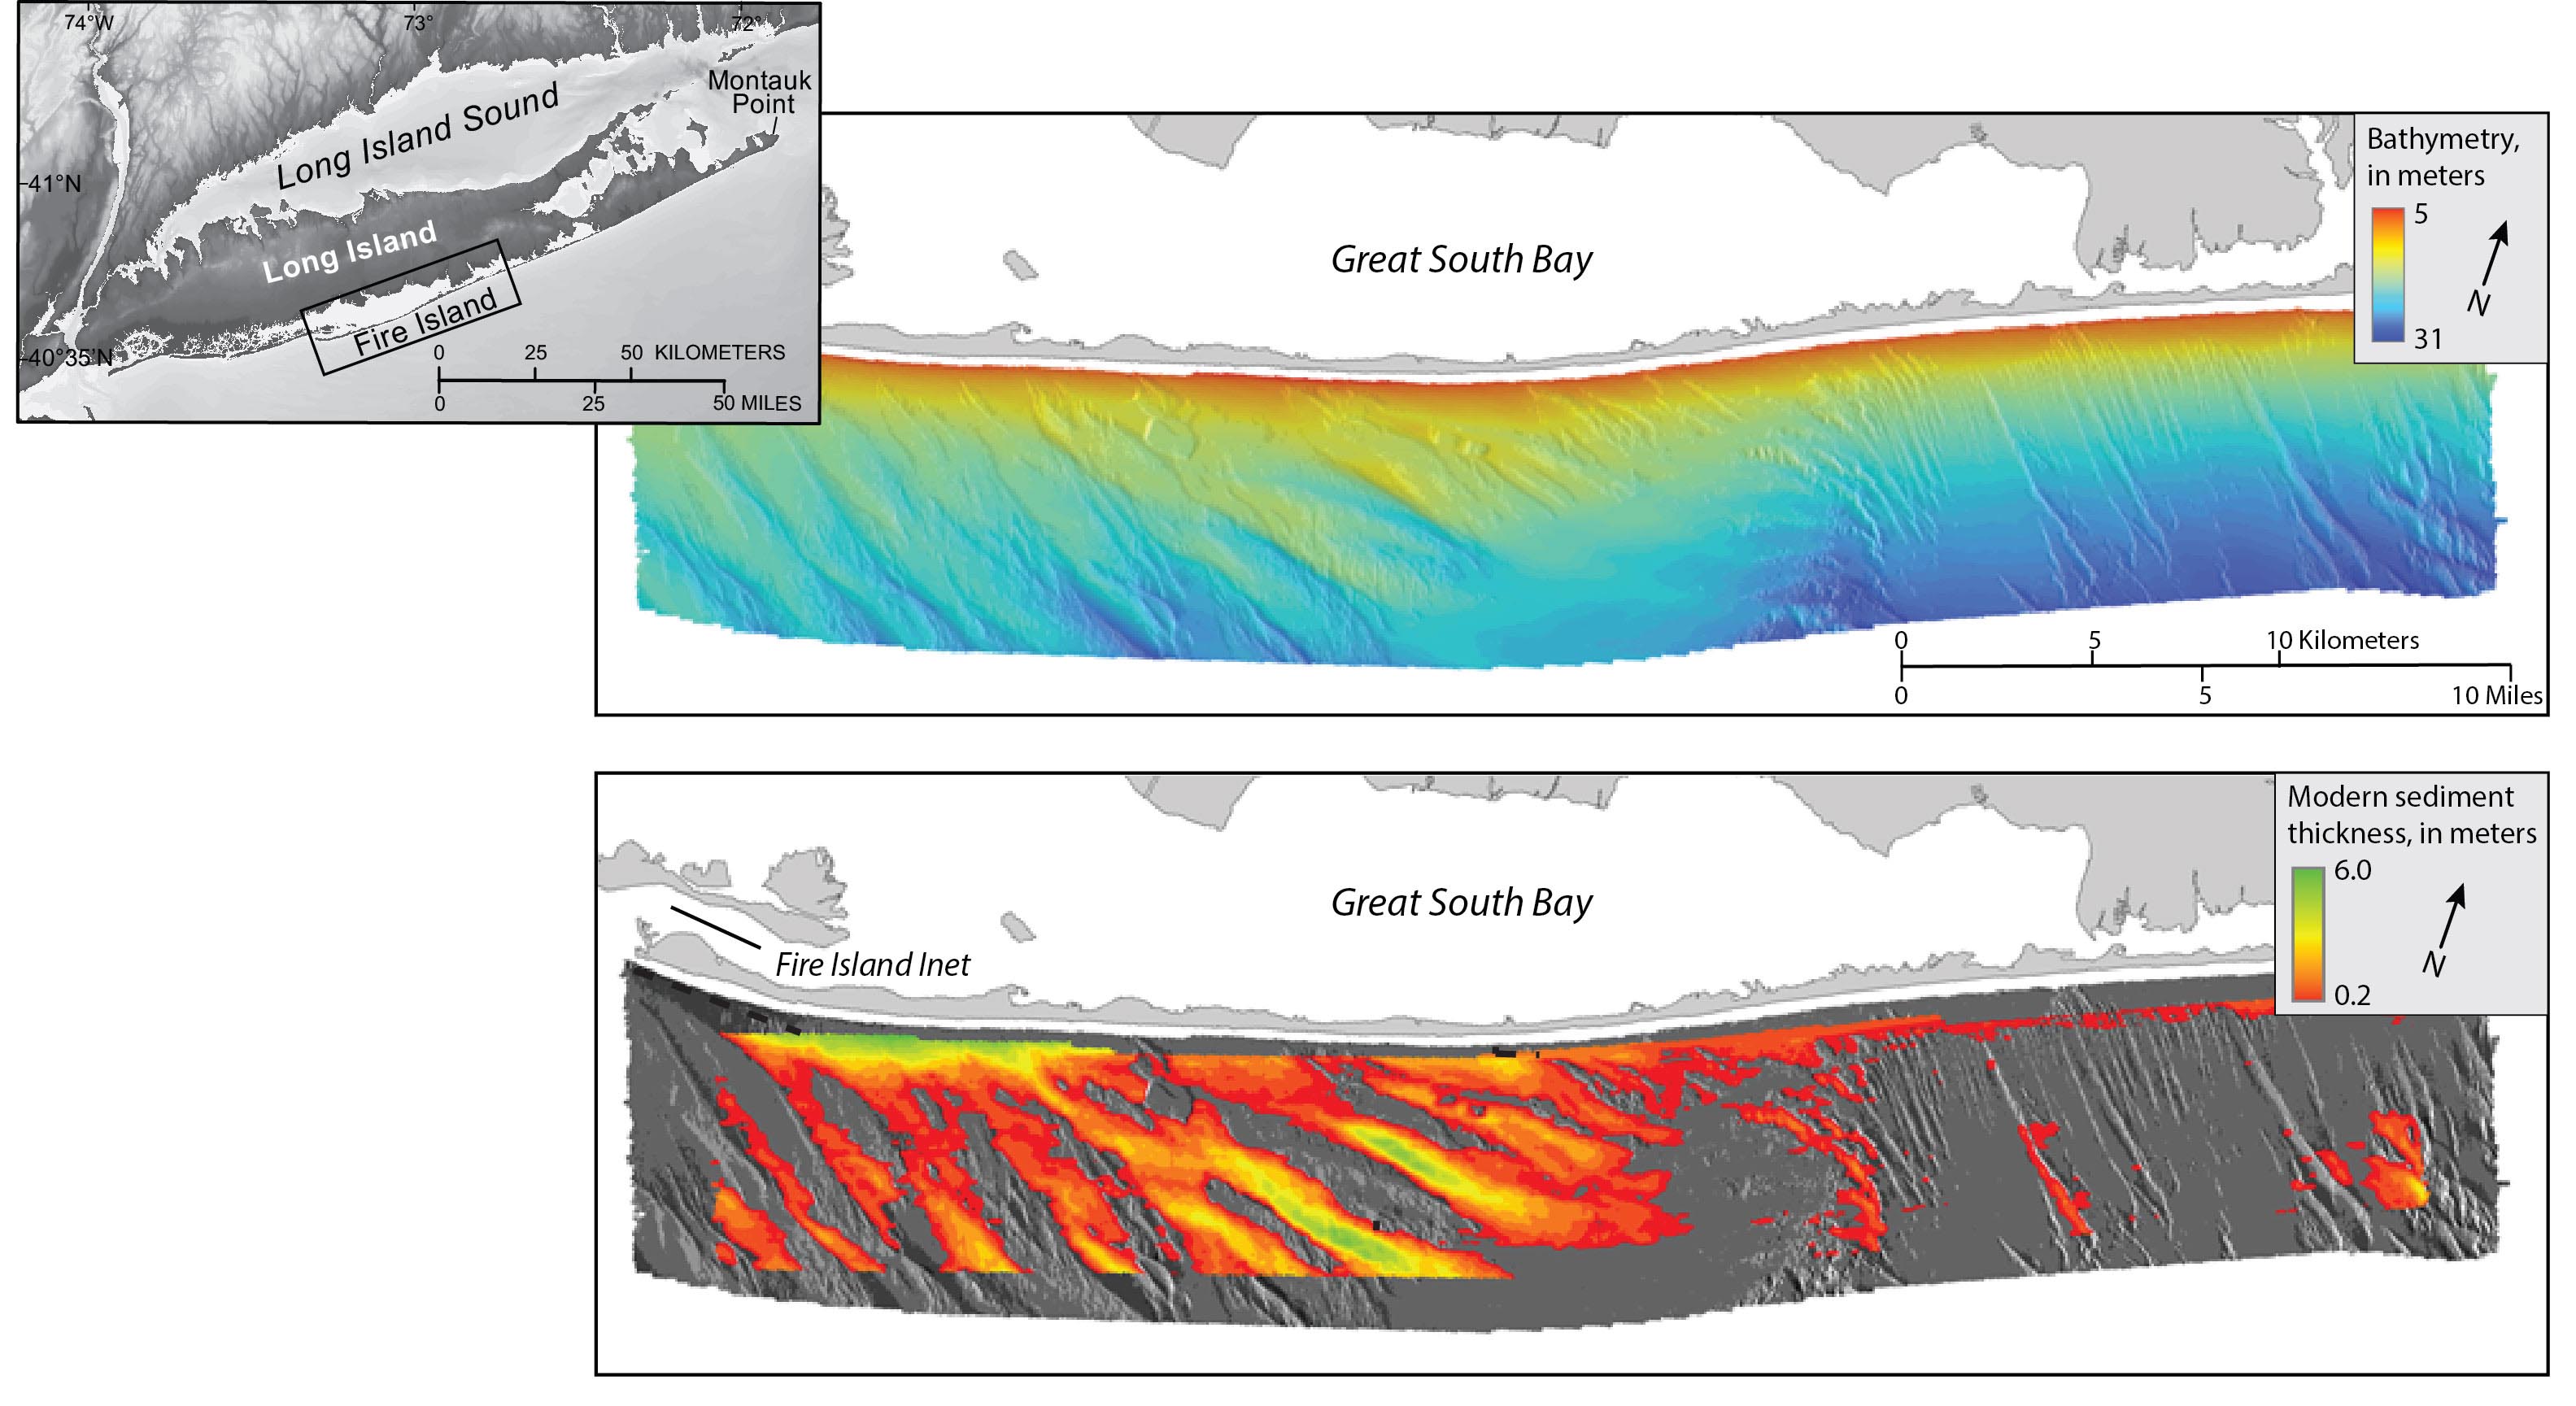 image showing survey location, bathymetry and modern sediment thickness offshore of Fire Island, NY